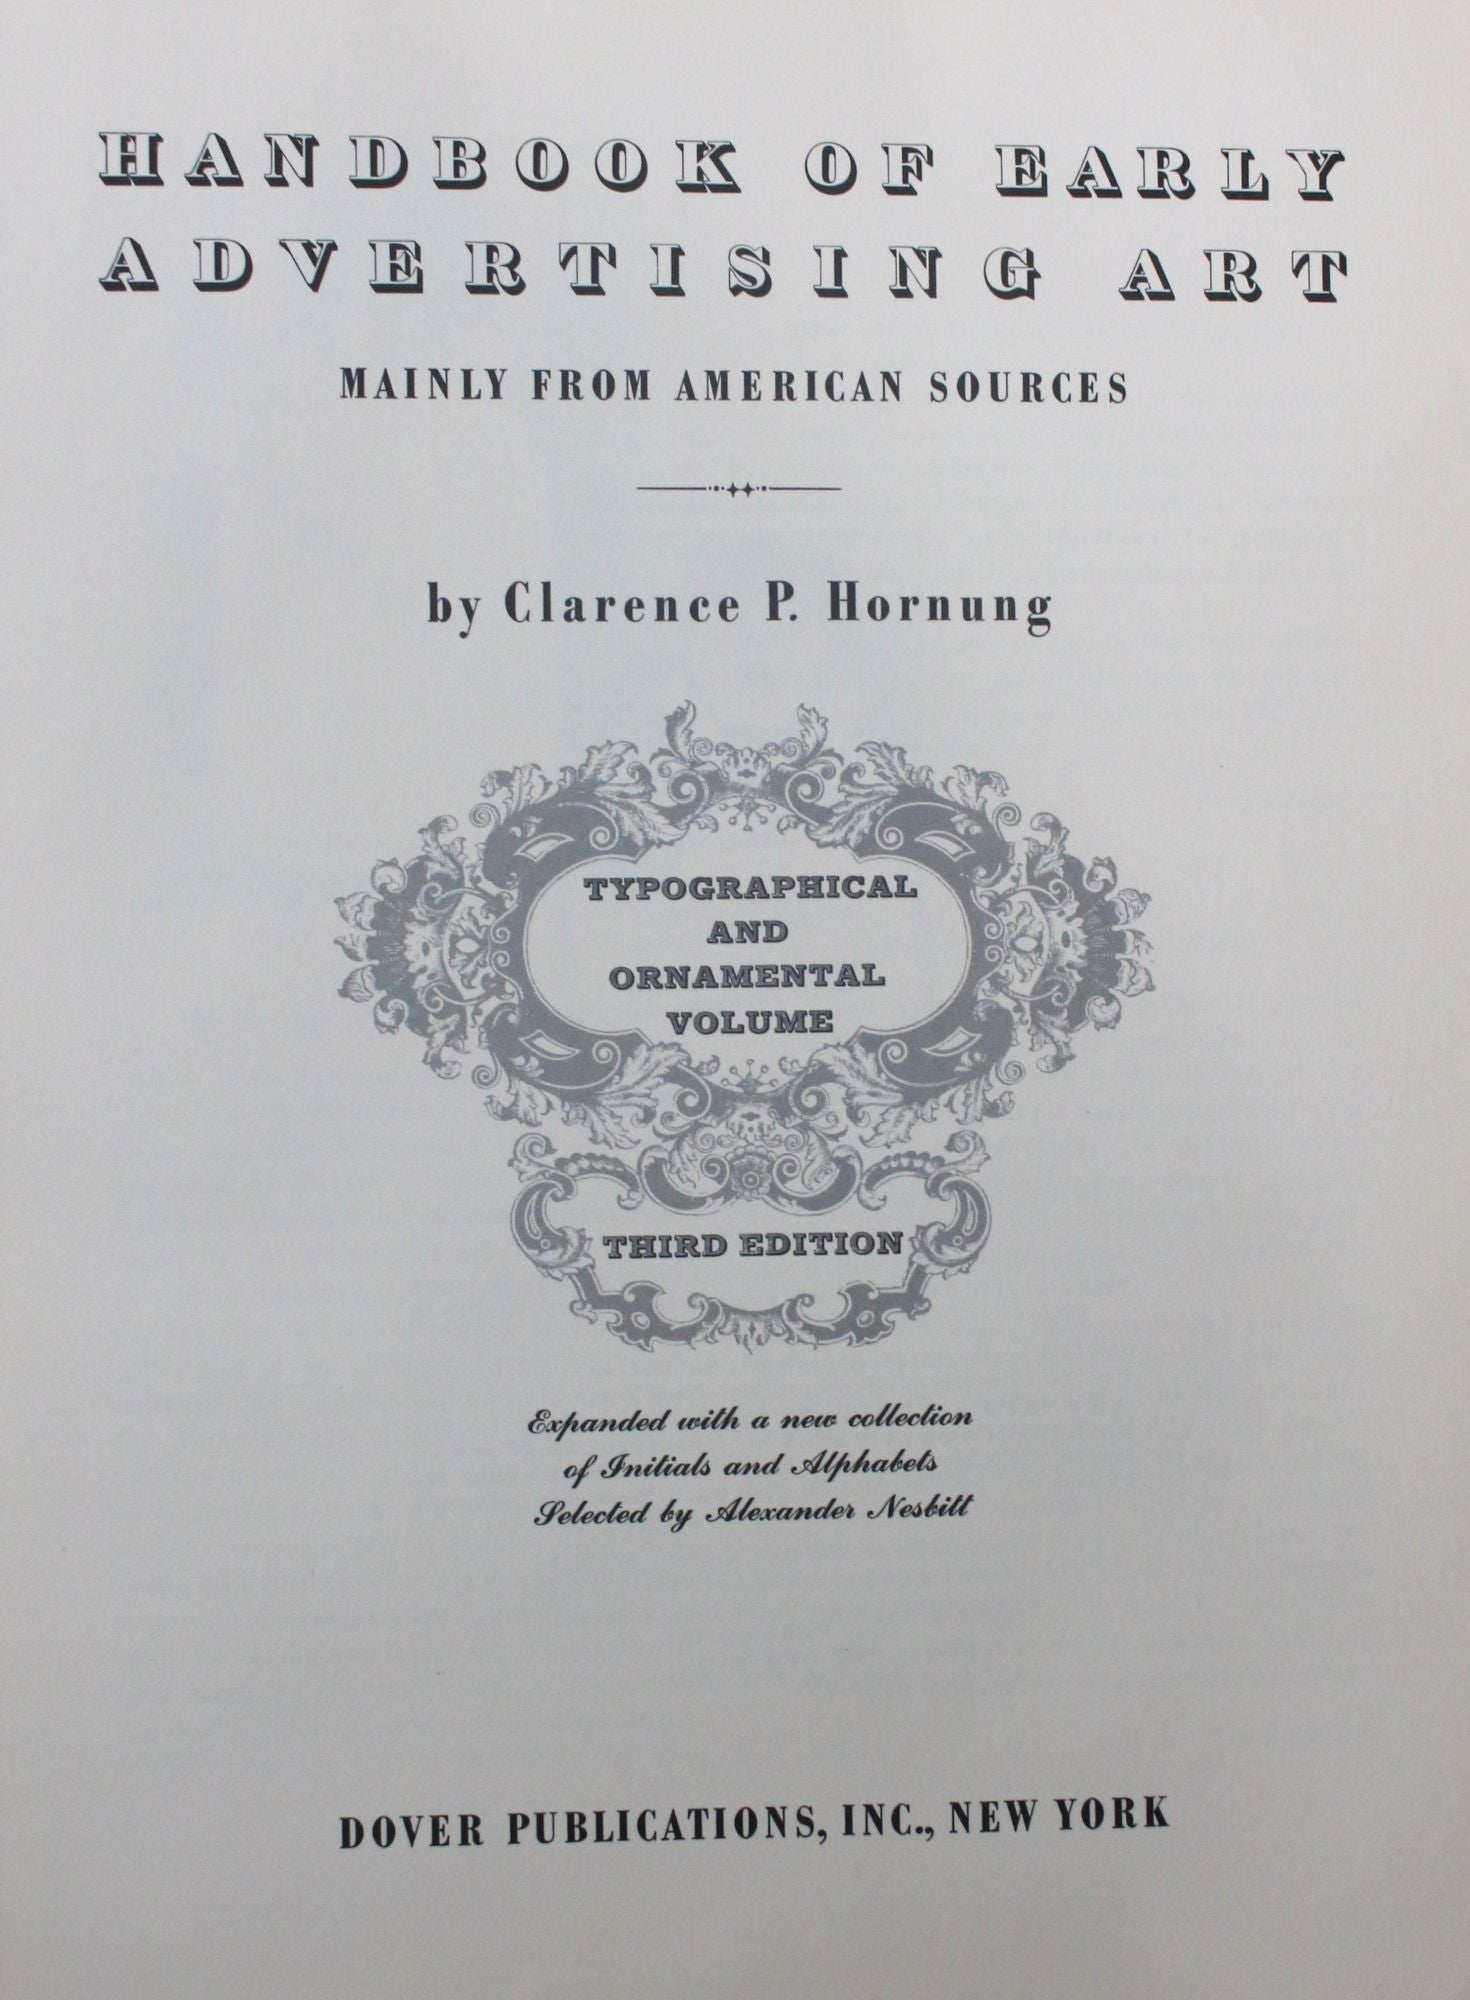 Handbook of Early Advertising Art, Mainly from American Sources 